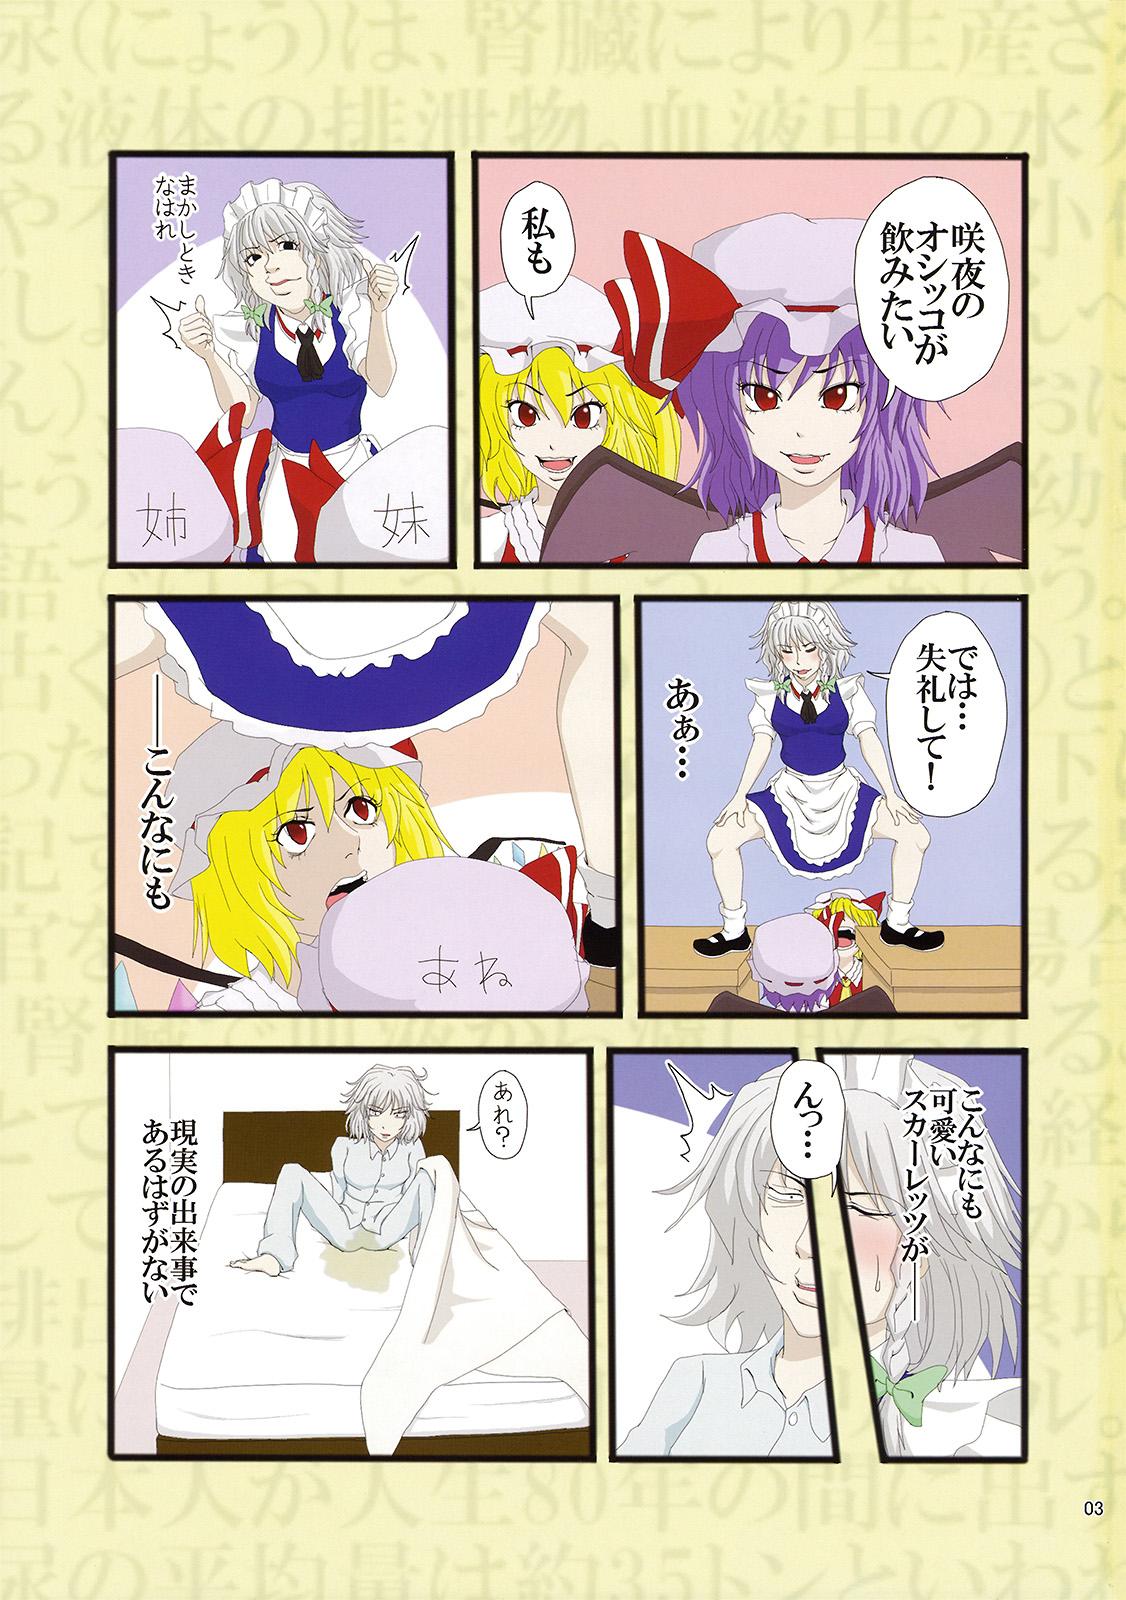 Outdoors 完全で瀟洒な尿者 - Touhou project Blowjob - Page 3